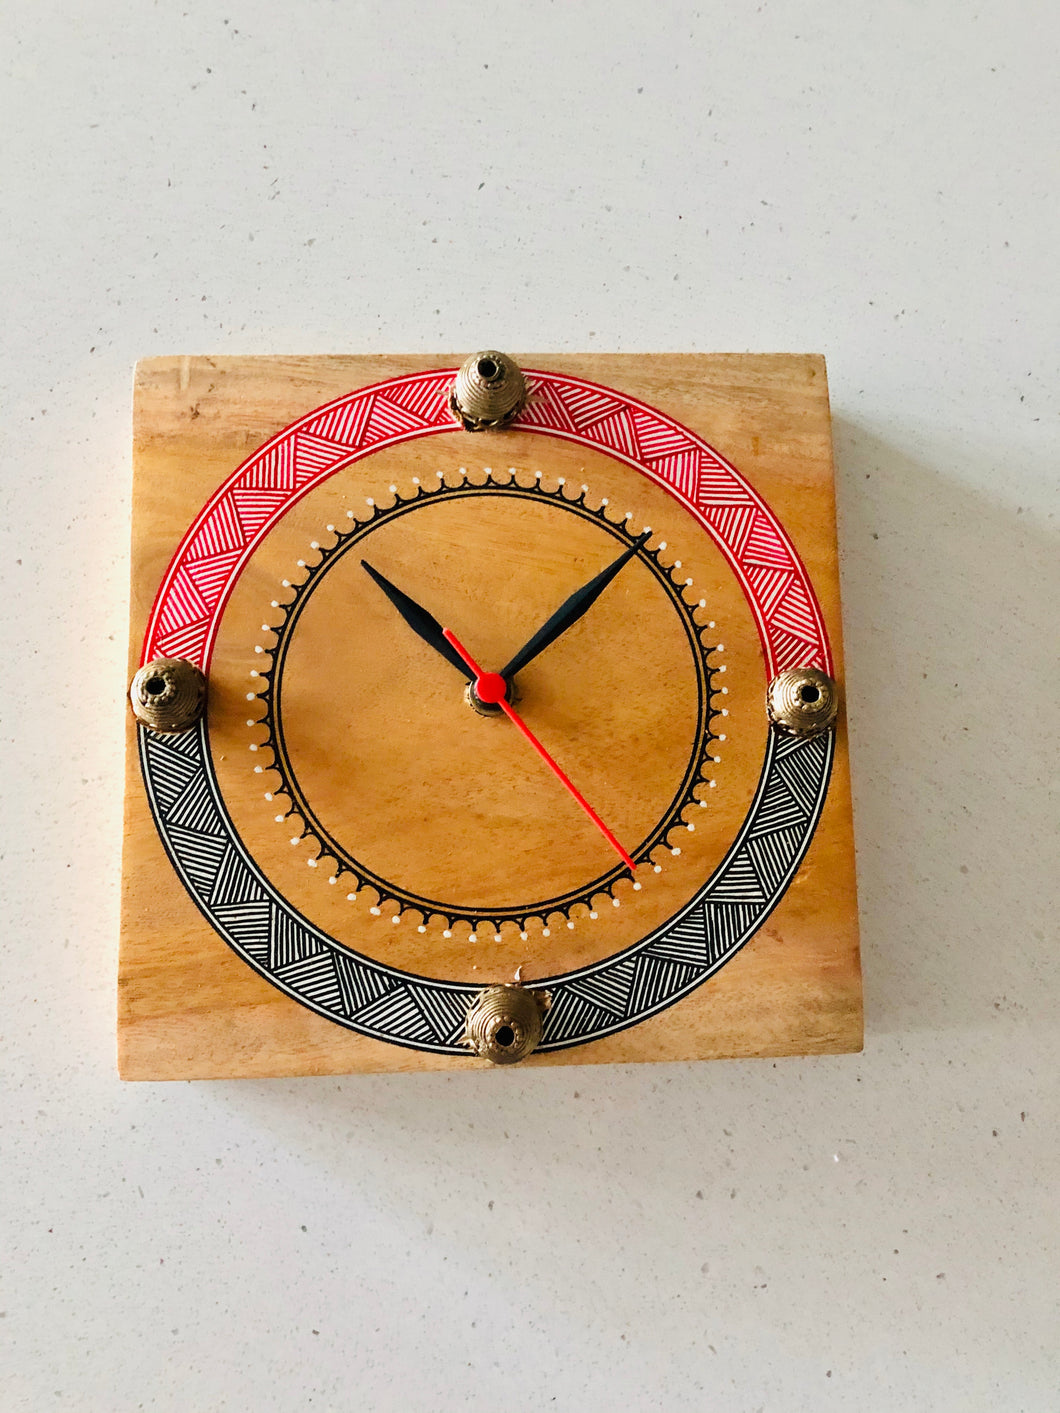 Handcrafted and Hand-painted Clock